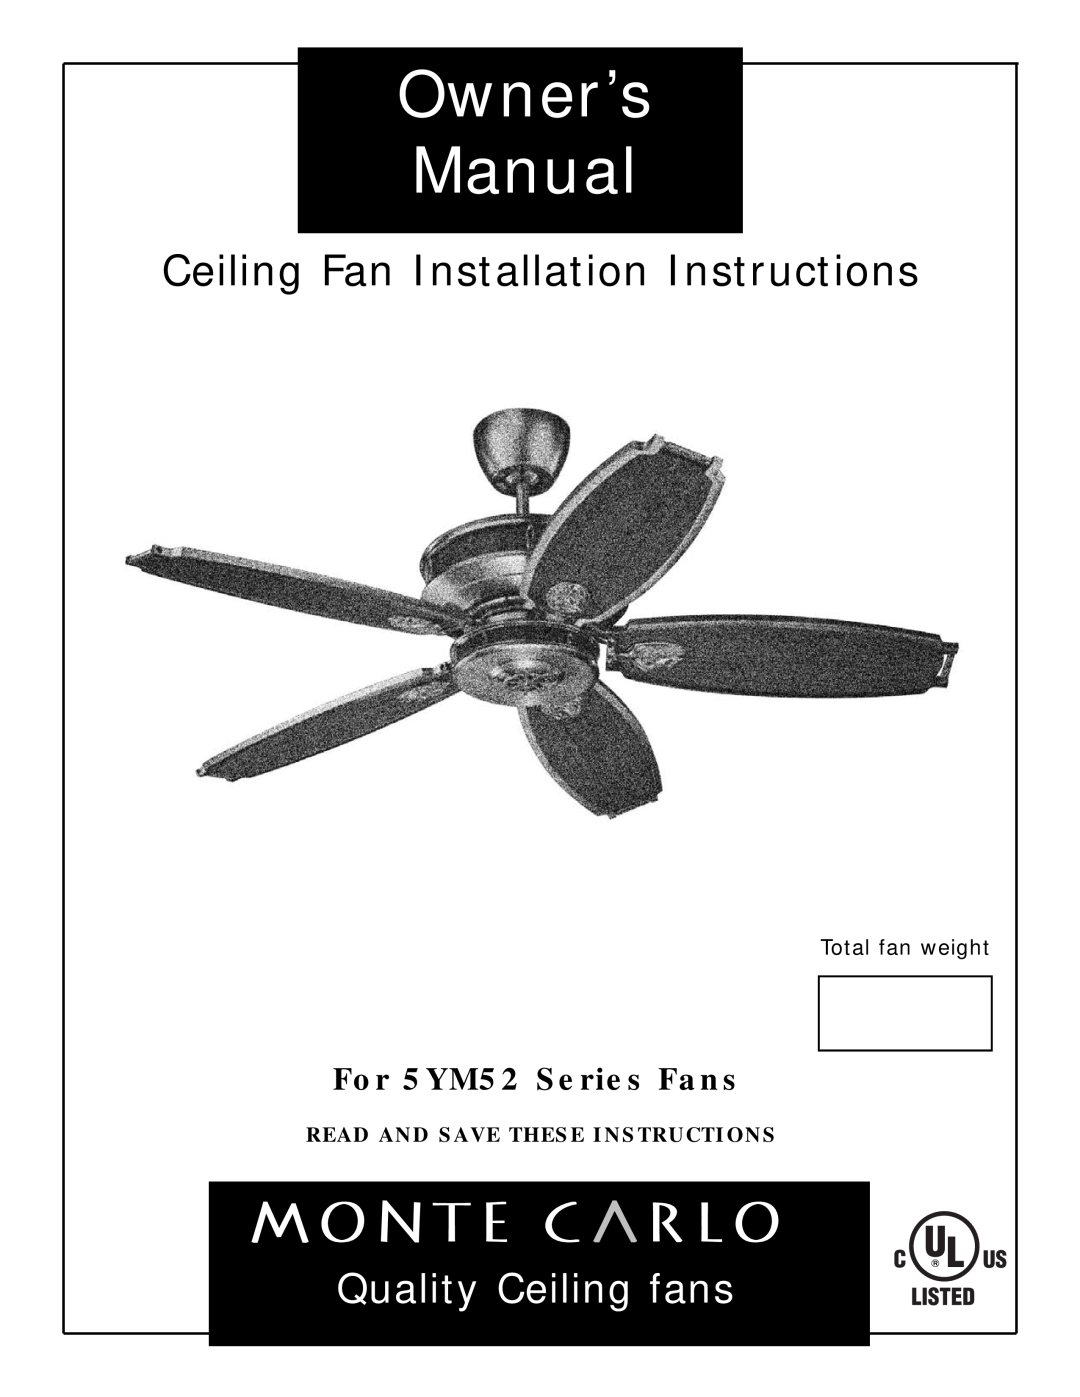 Monte Carlo Fan Company 5YM52 owner manual Read And Save These Instructions, Ceiling Fan Installation Instructions 